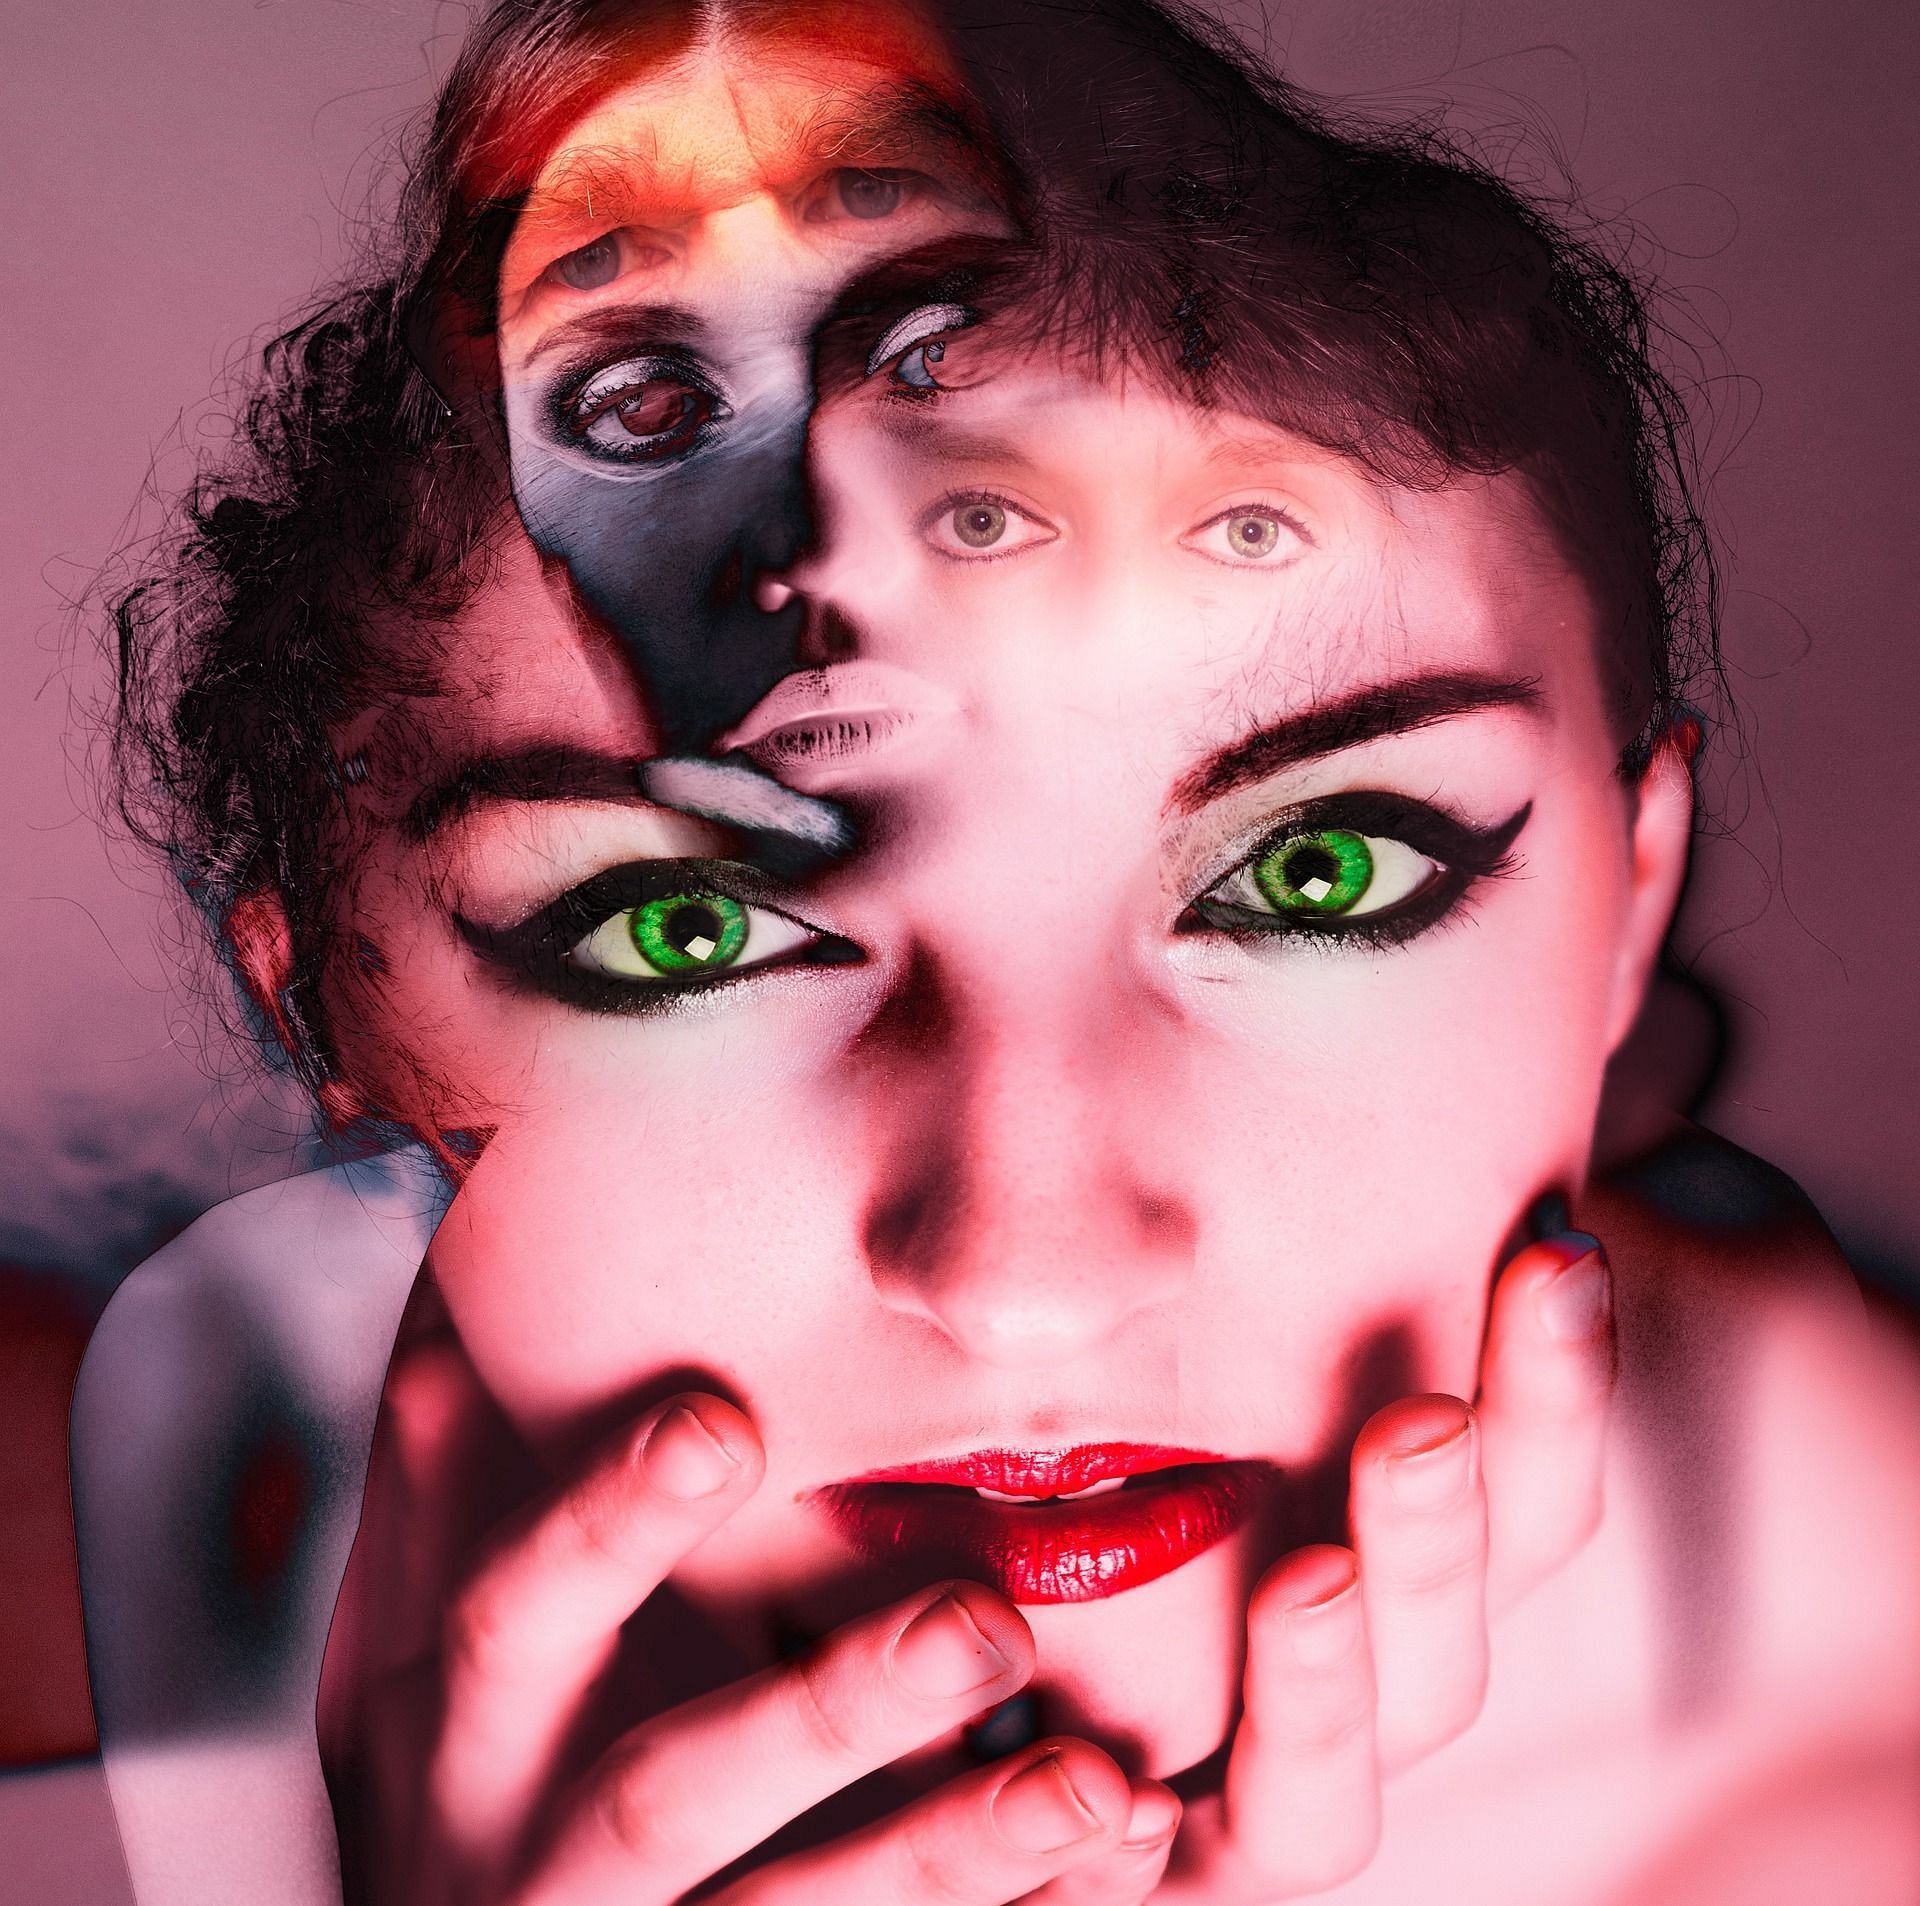 Dissociative personality disorder is a complex personality disorder. (Image via Freepik/ Freepik)